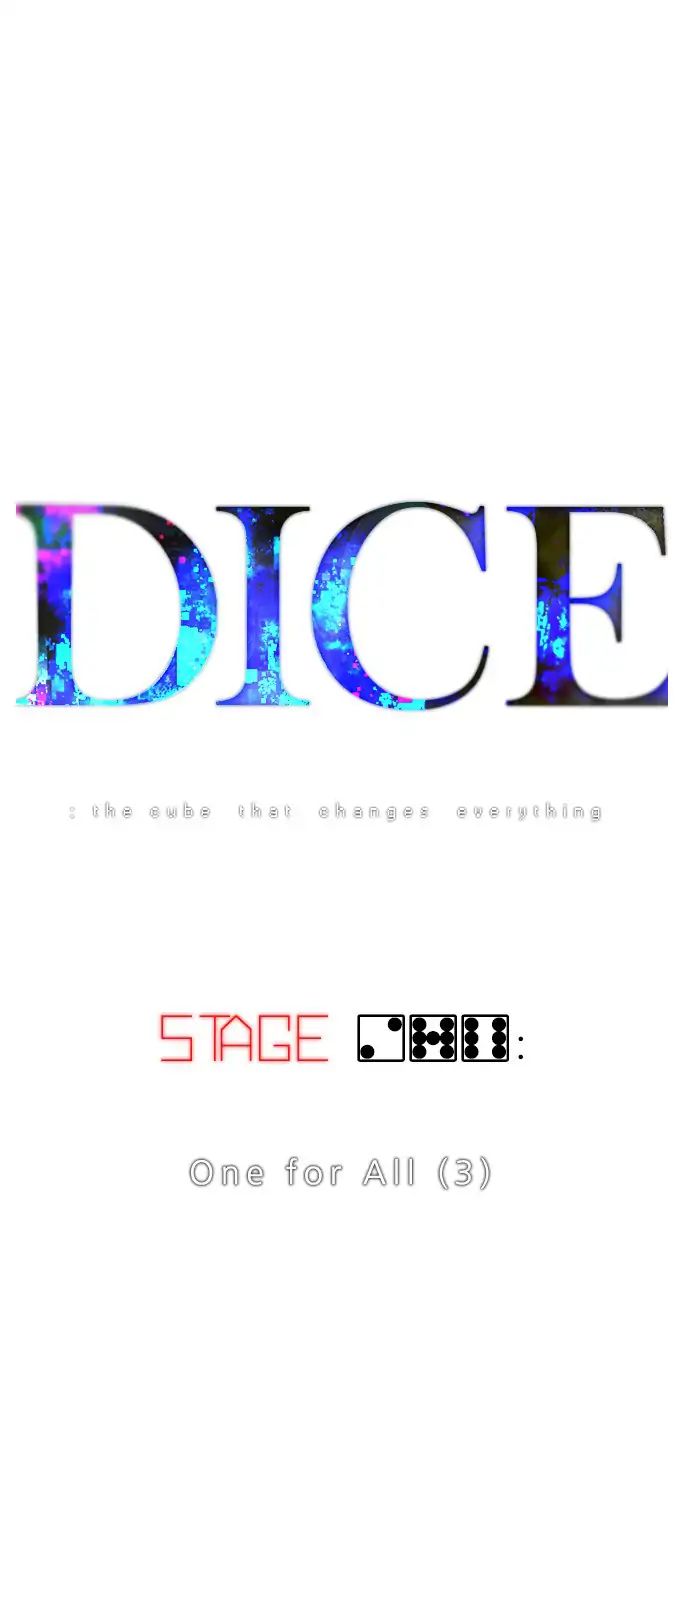 Dice: The Cube That Changes Everything - Page 2